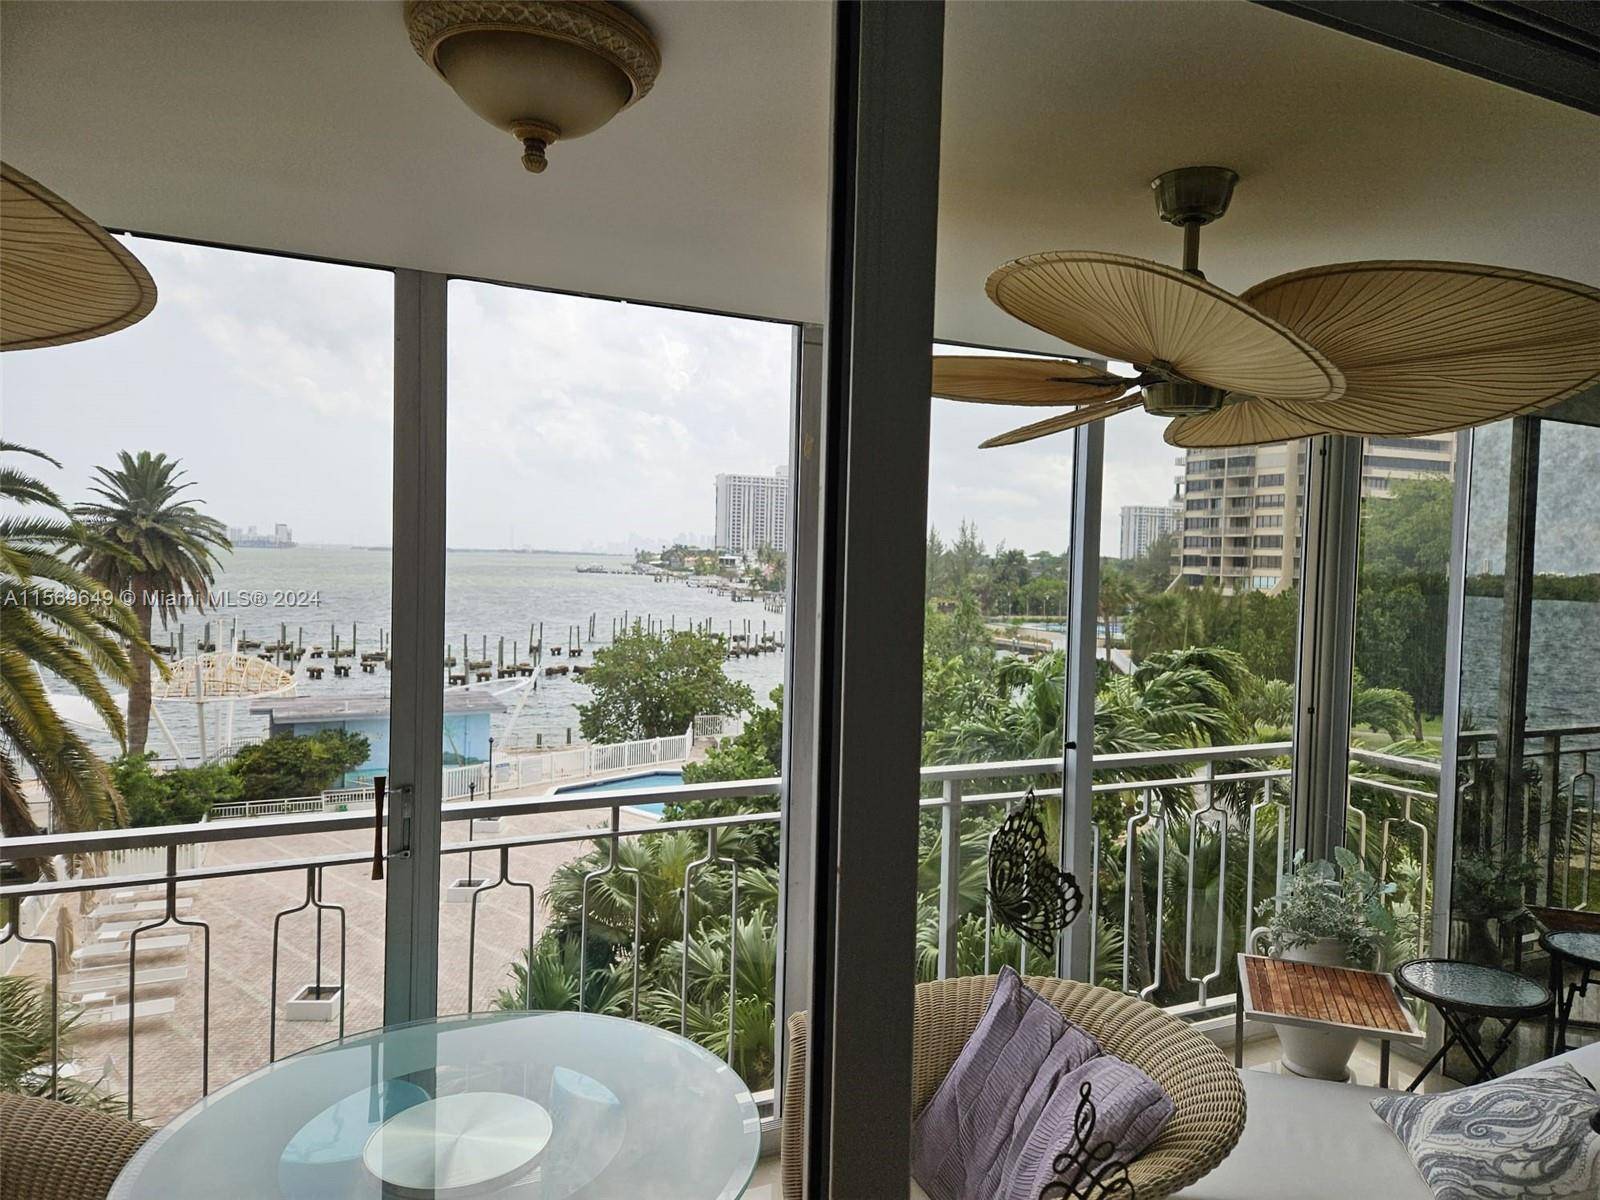 This spacious two bedroom, two bathroom residence offers stunning views of Biscayne Bay from every room.